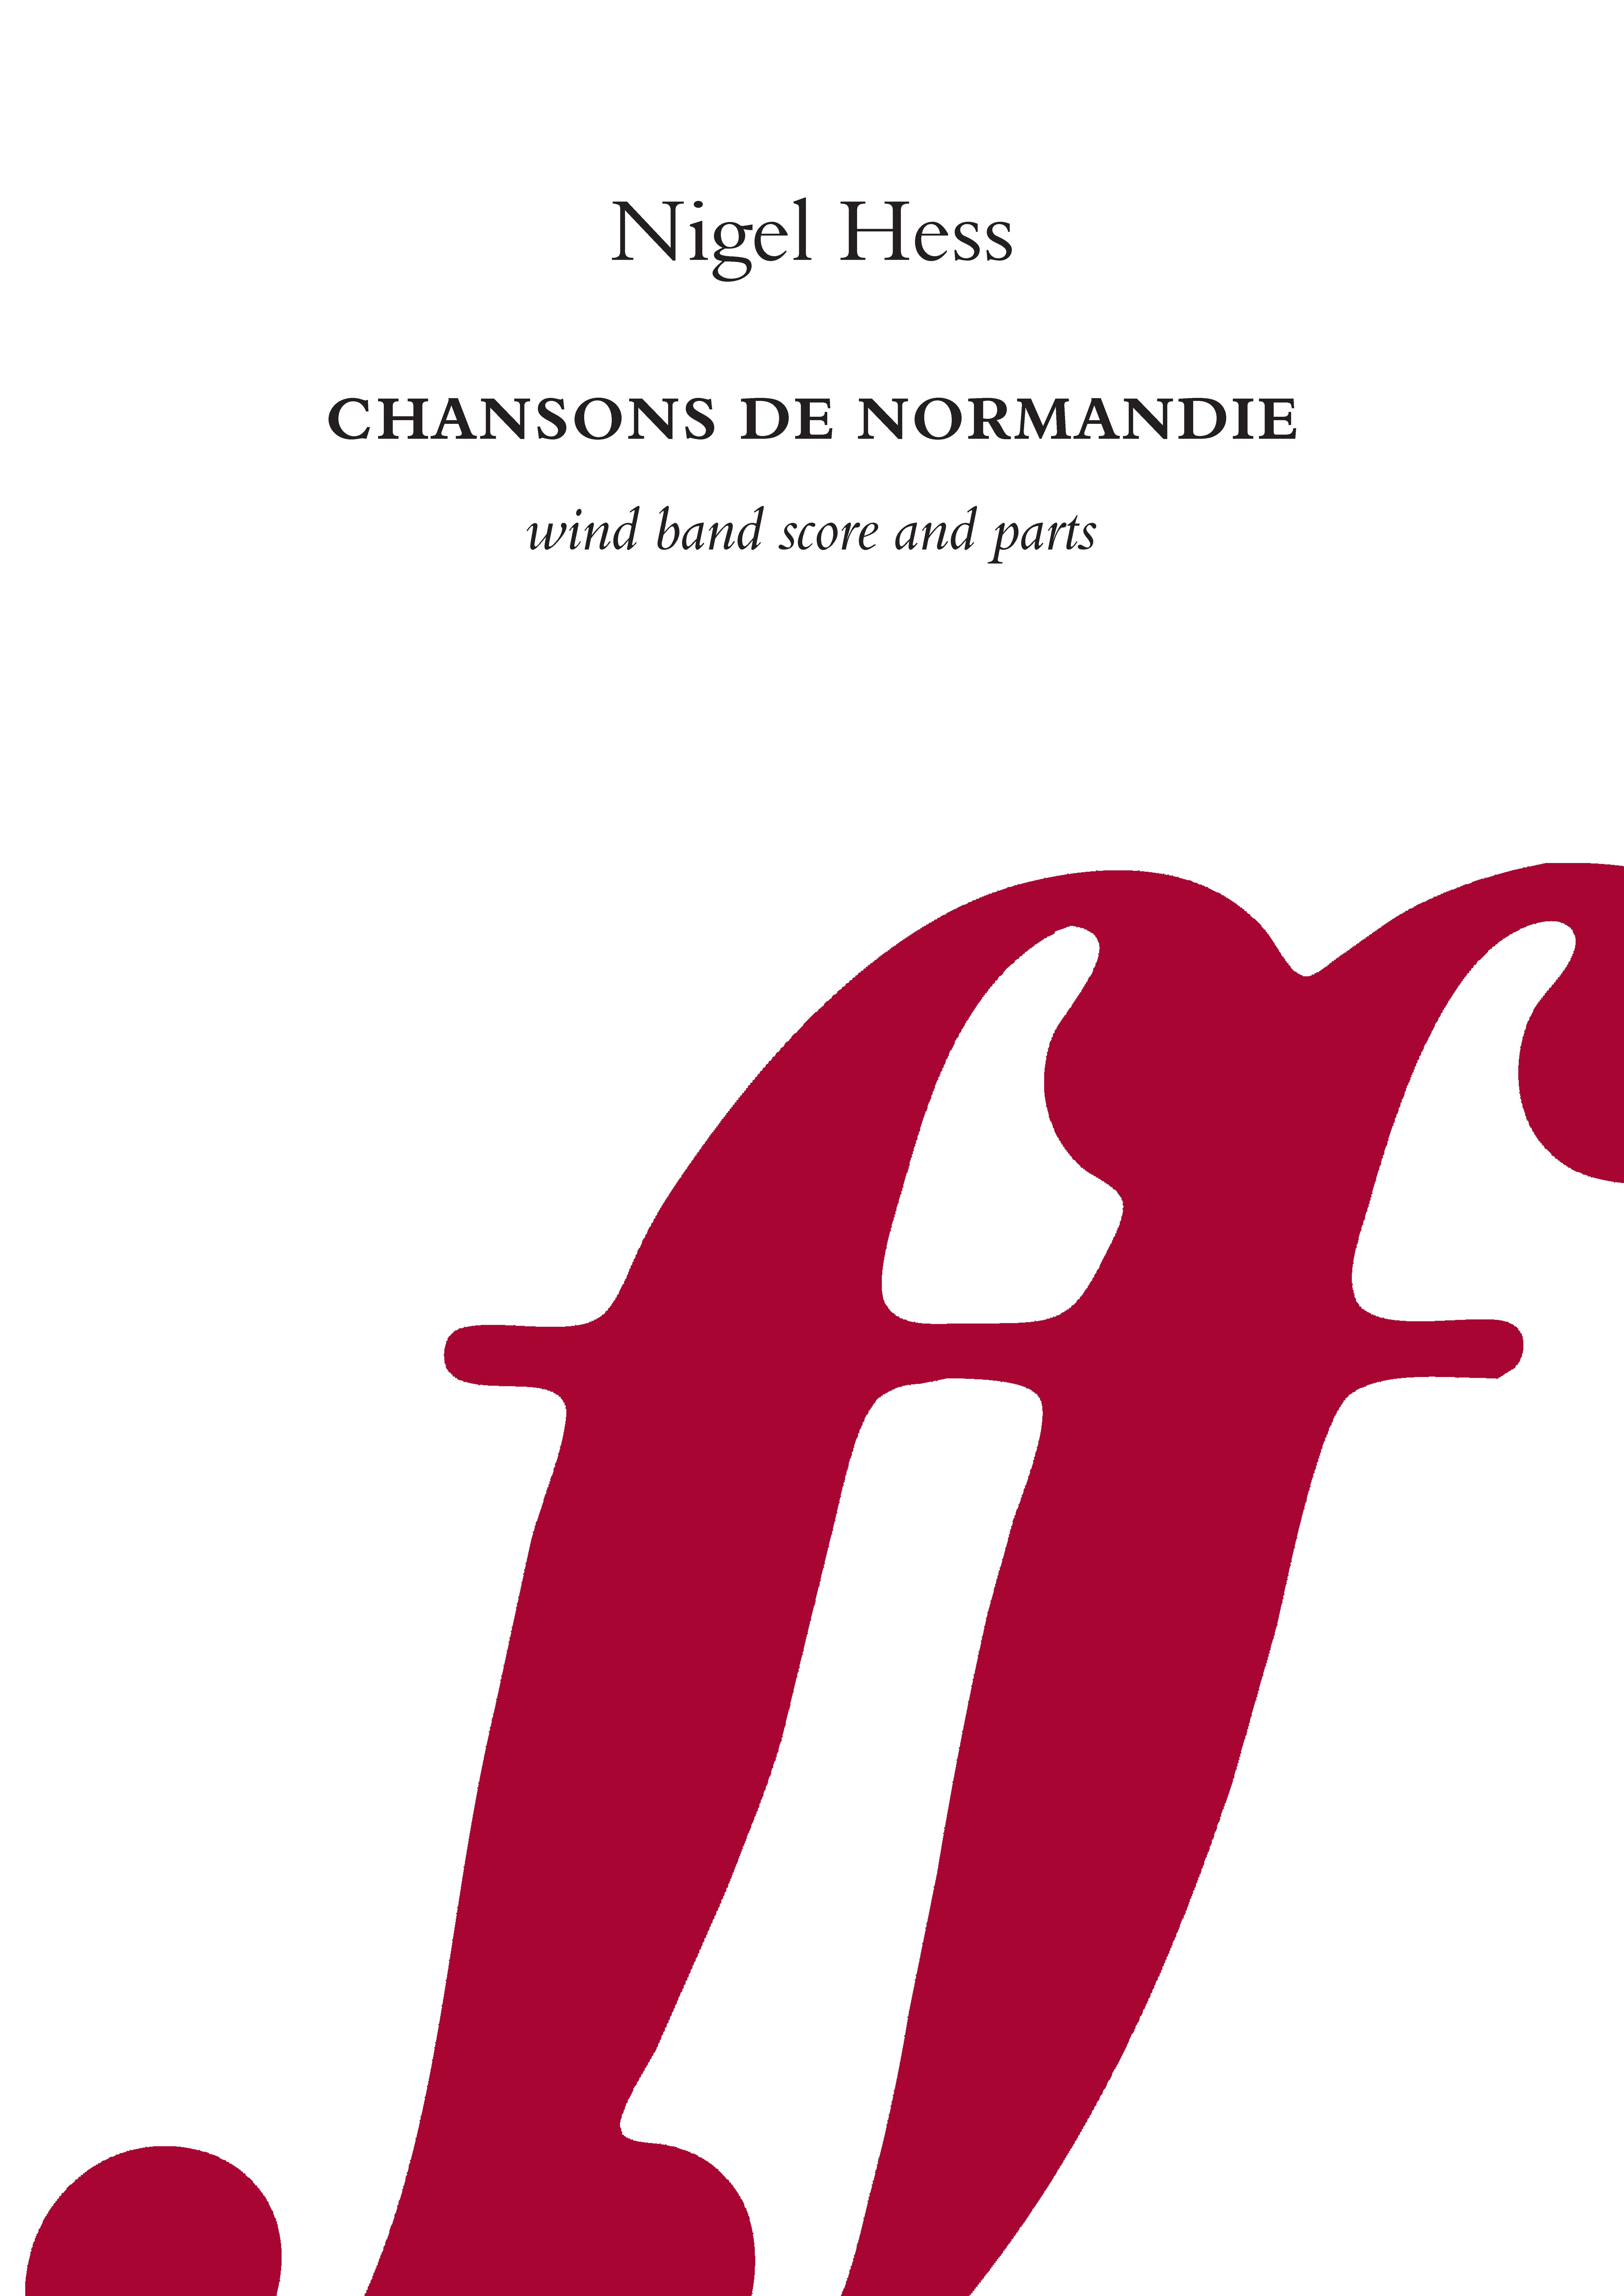 Chansons De Normandie (Wind Band Sc And Pts) (HESS NIGEL)